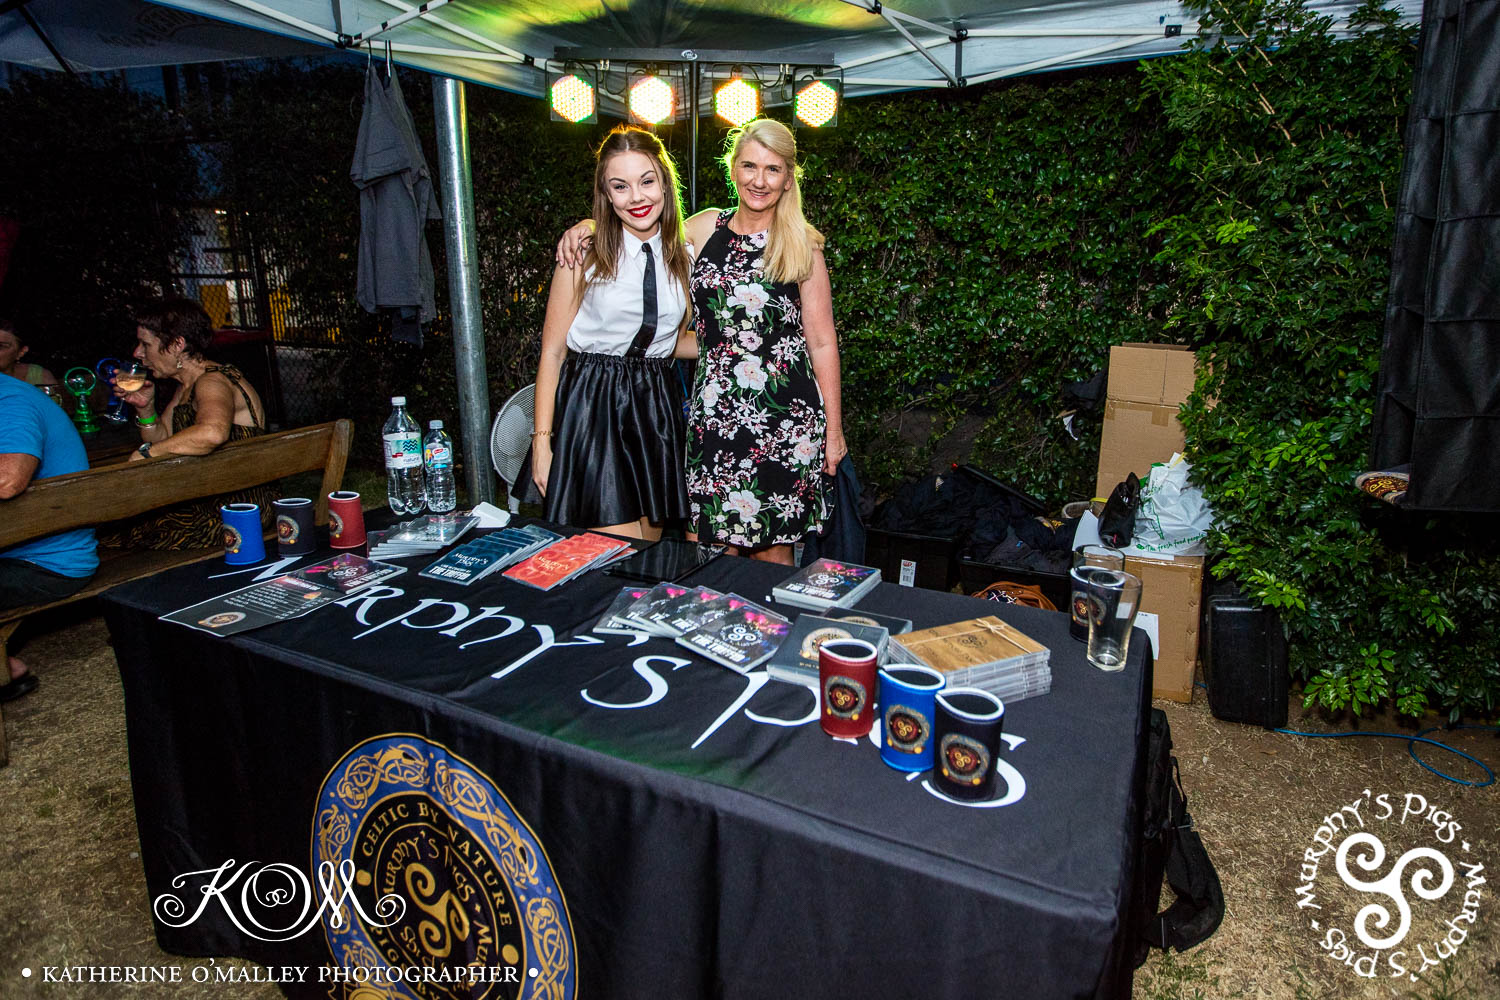 Shea & Chrissy manning the merch tent @ Tamworth Country Music Festival 2019